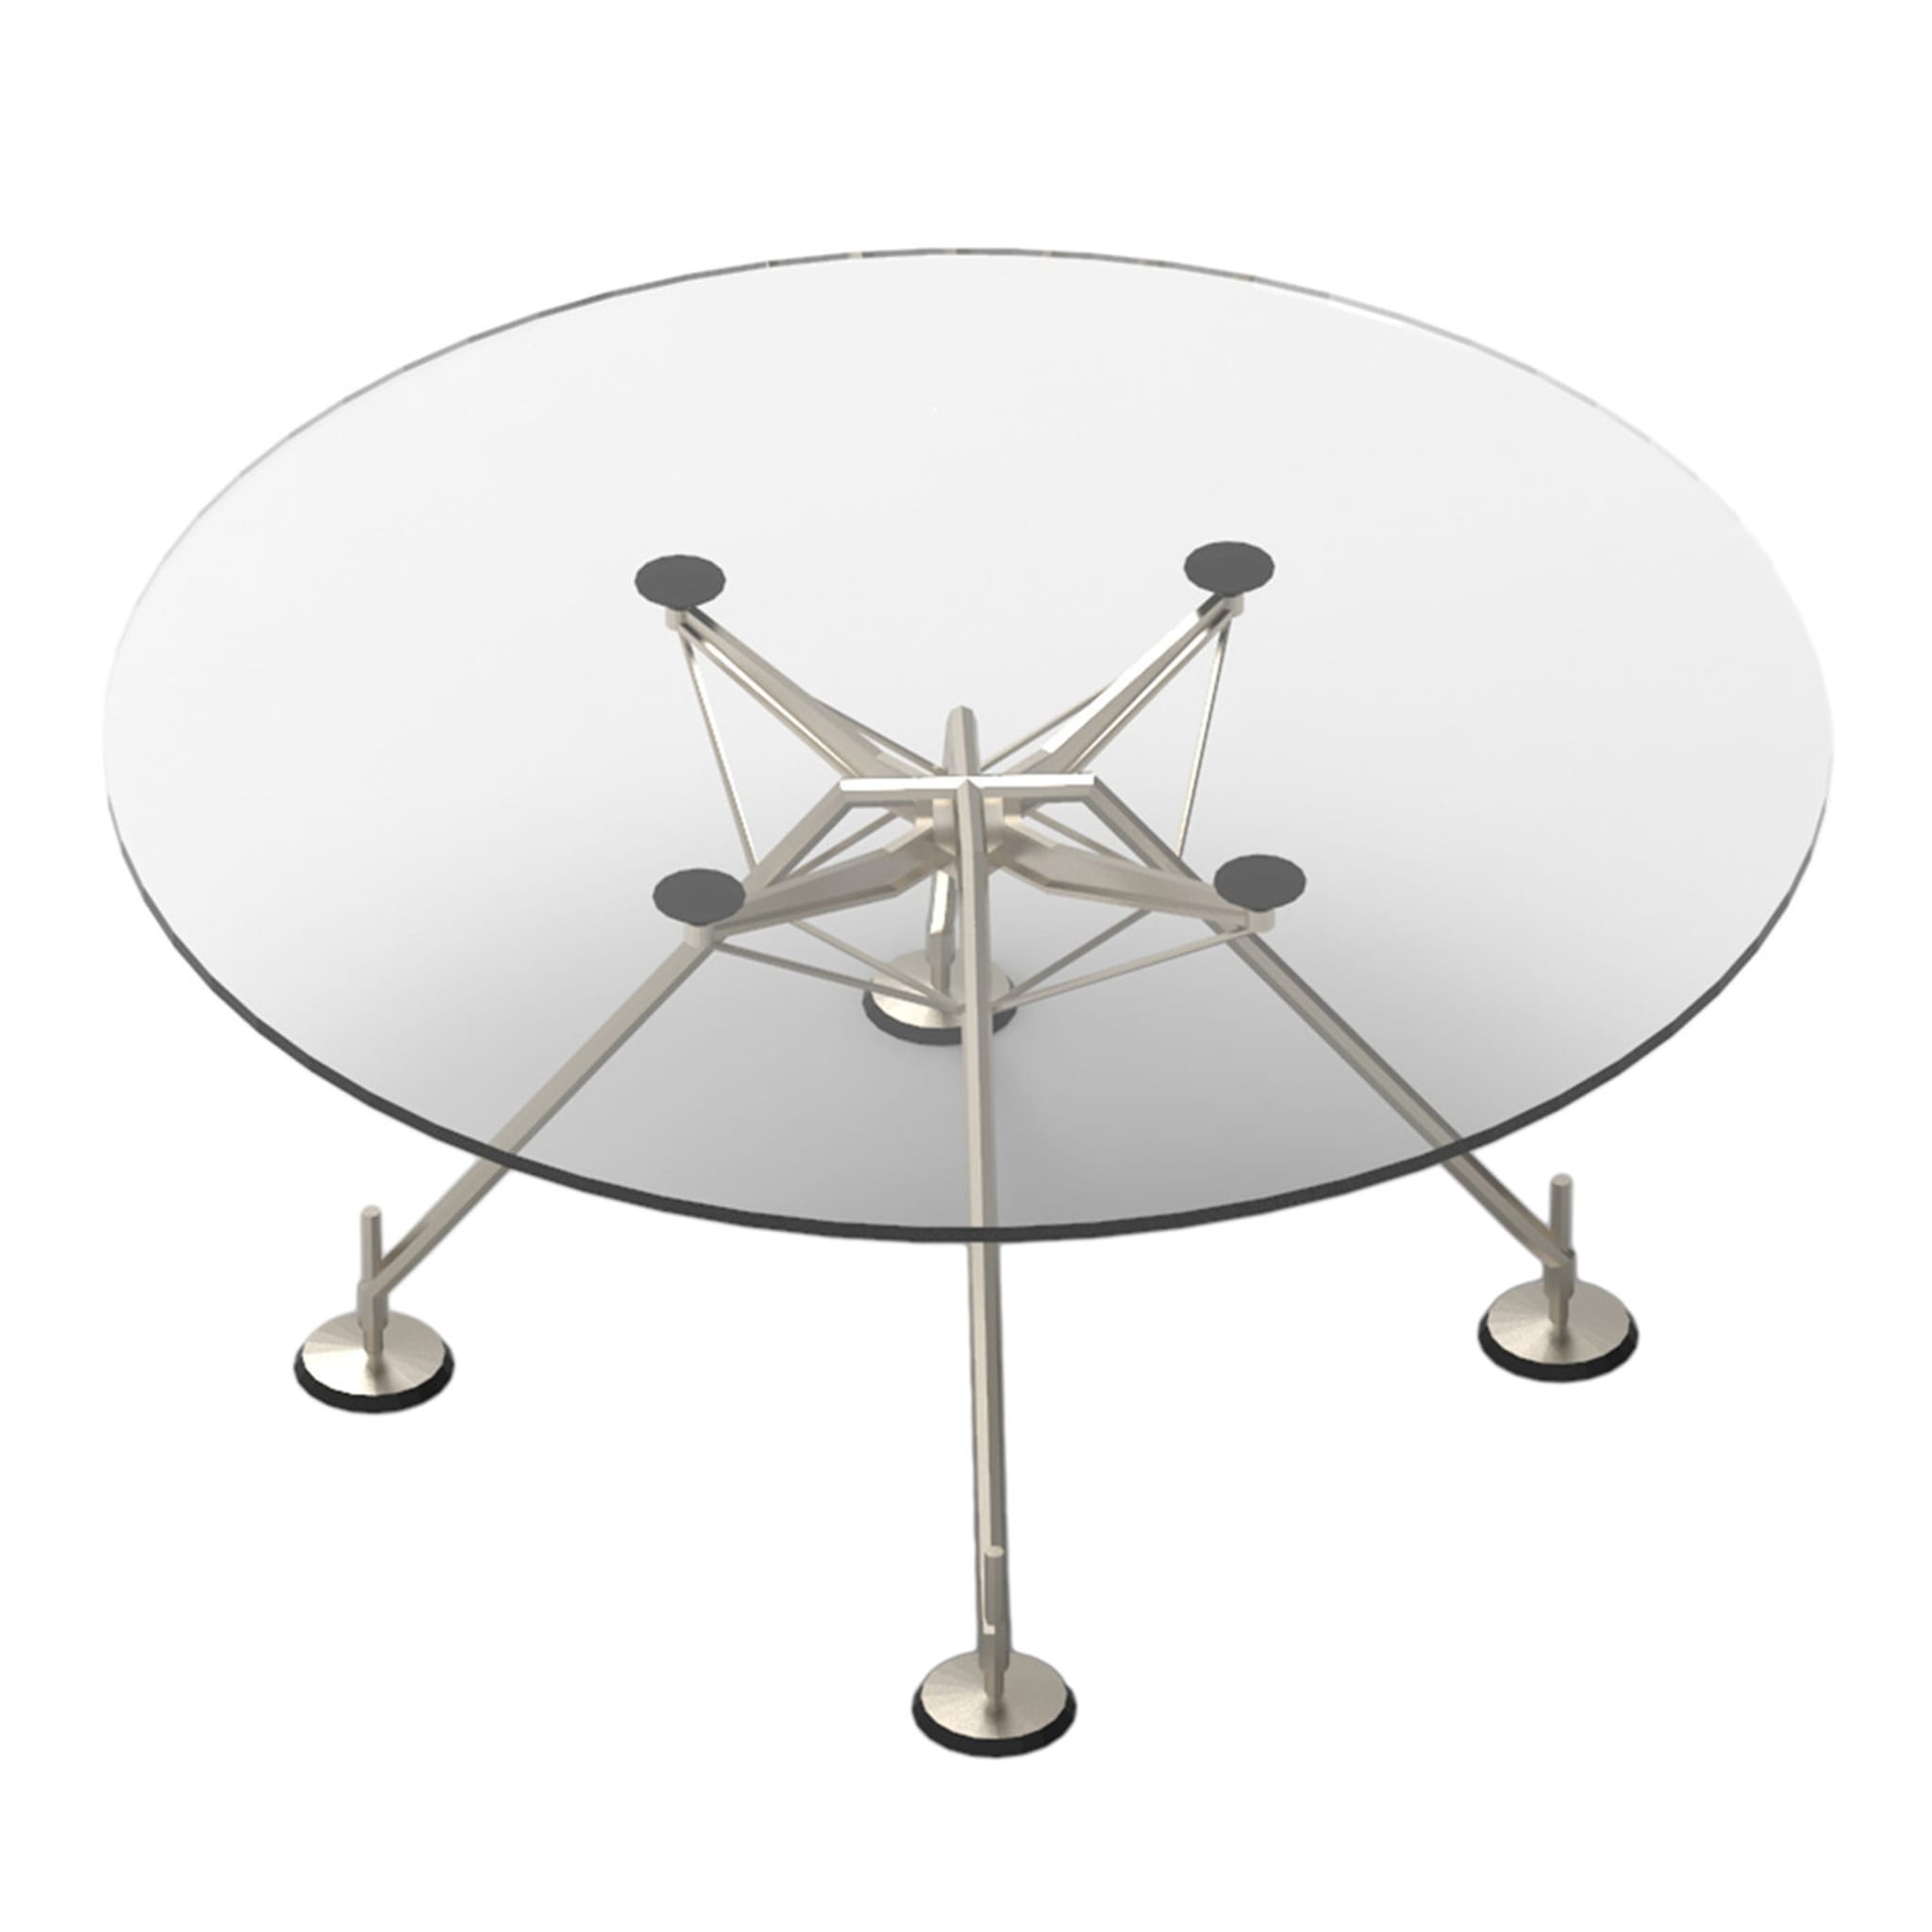 Nomos Round Table by Norman Foster - Main view